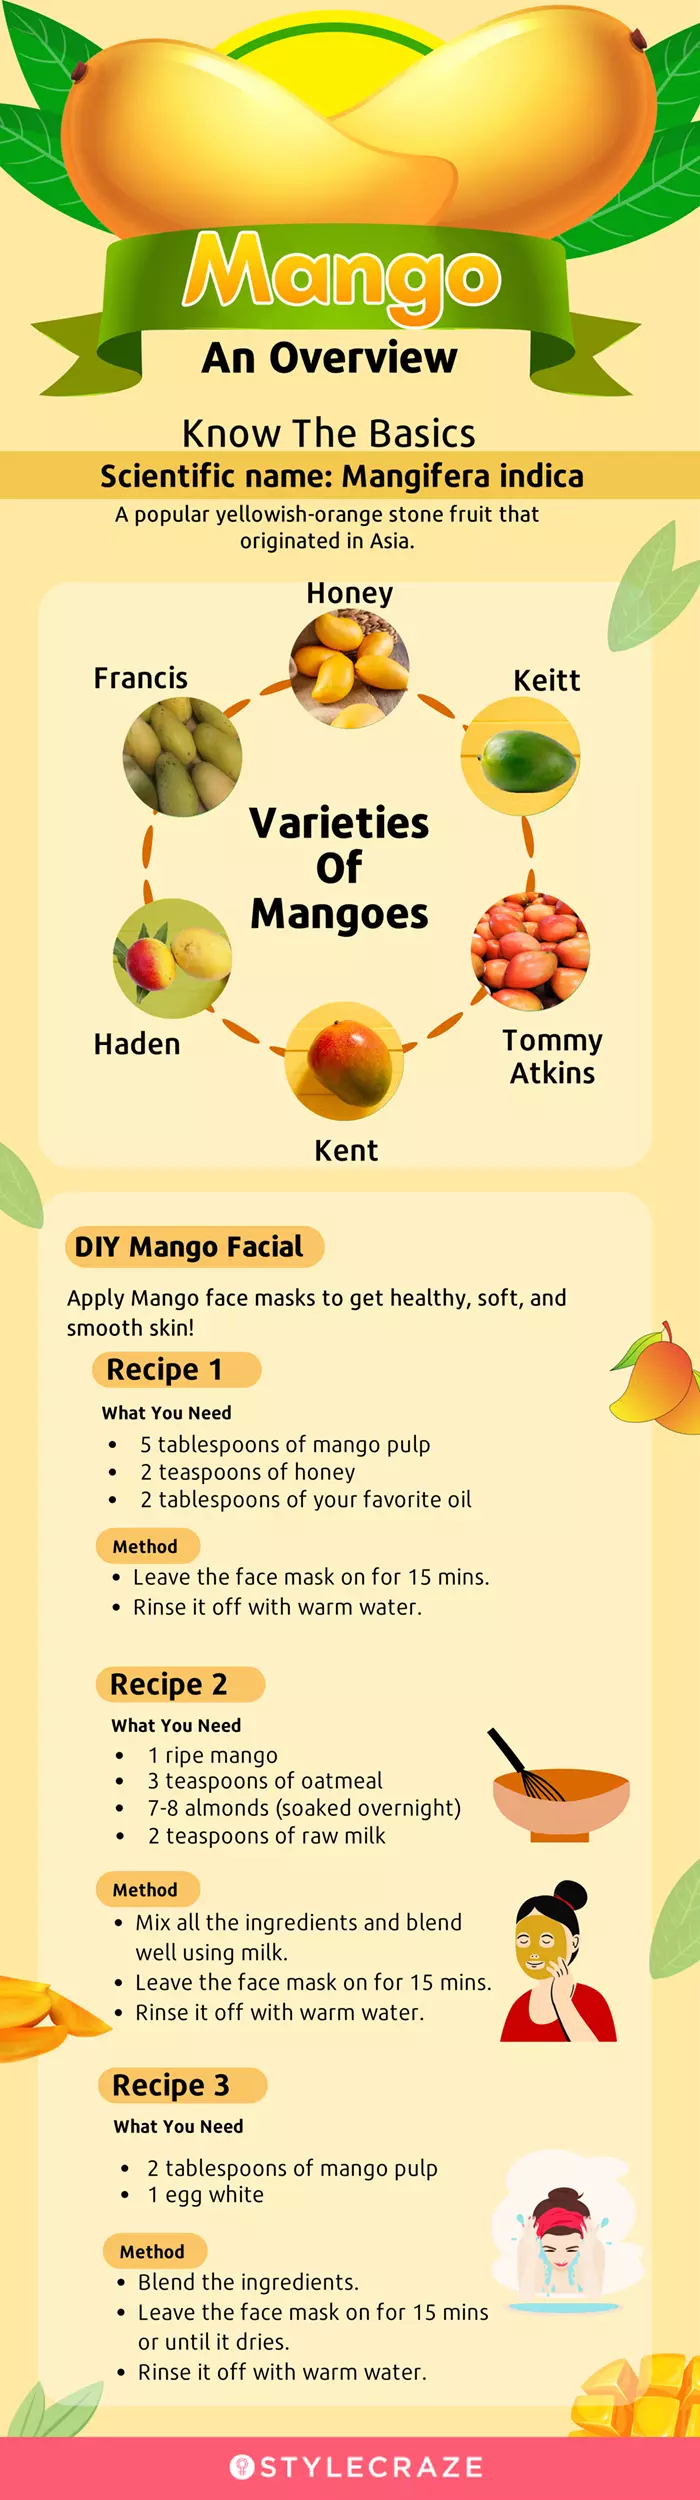 mango an overview (infographic)